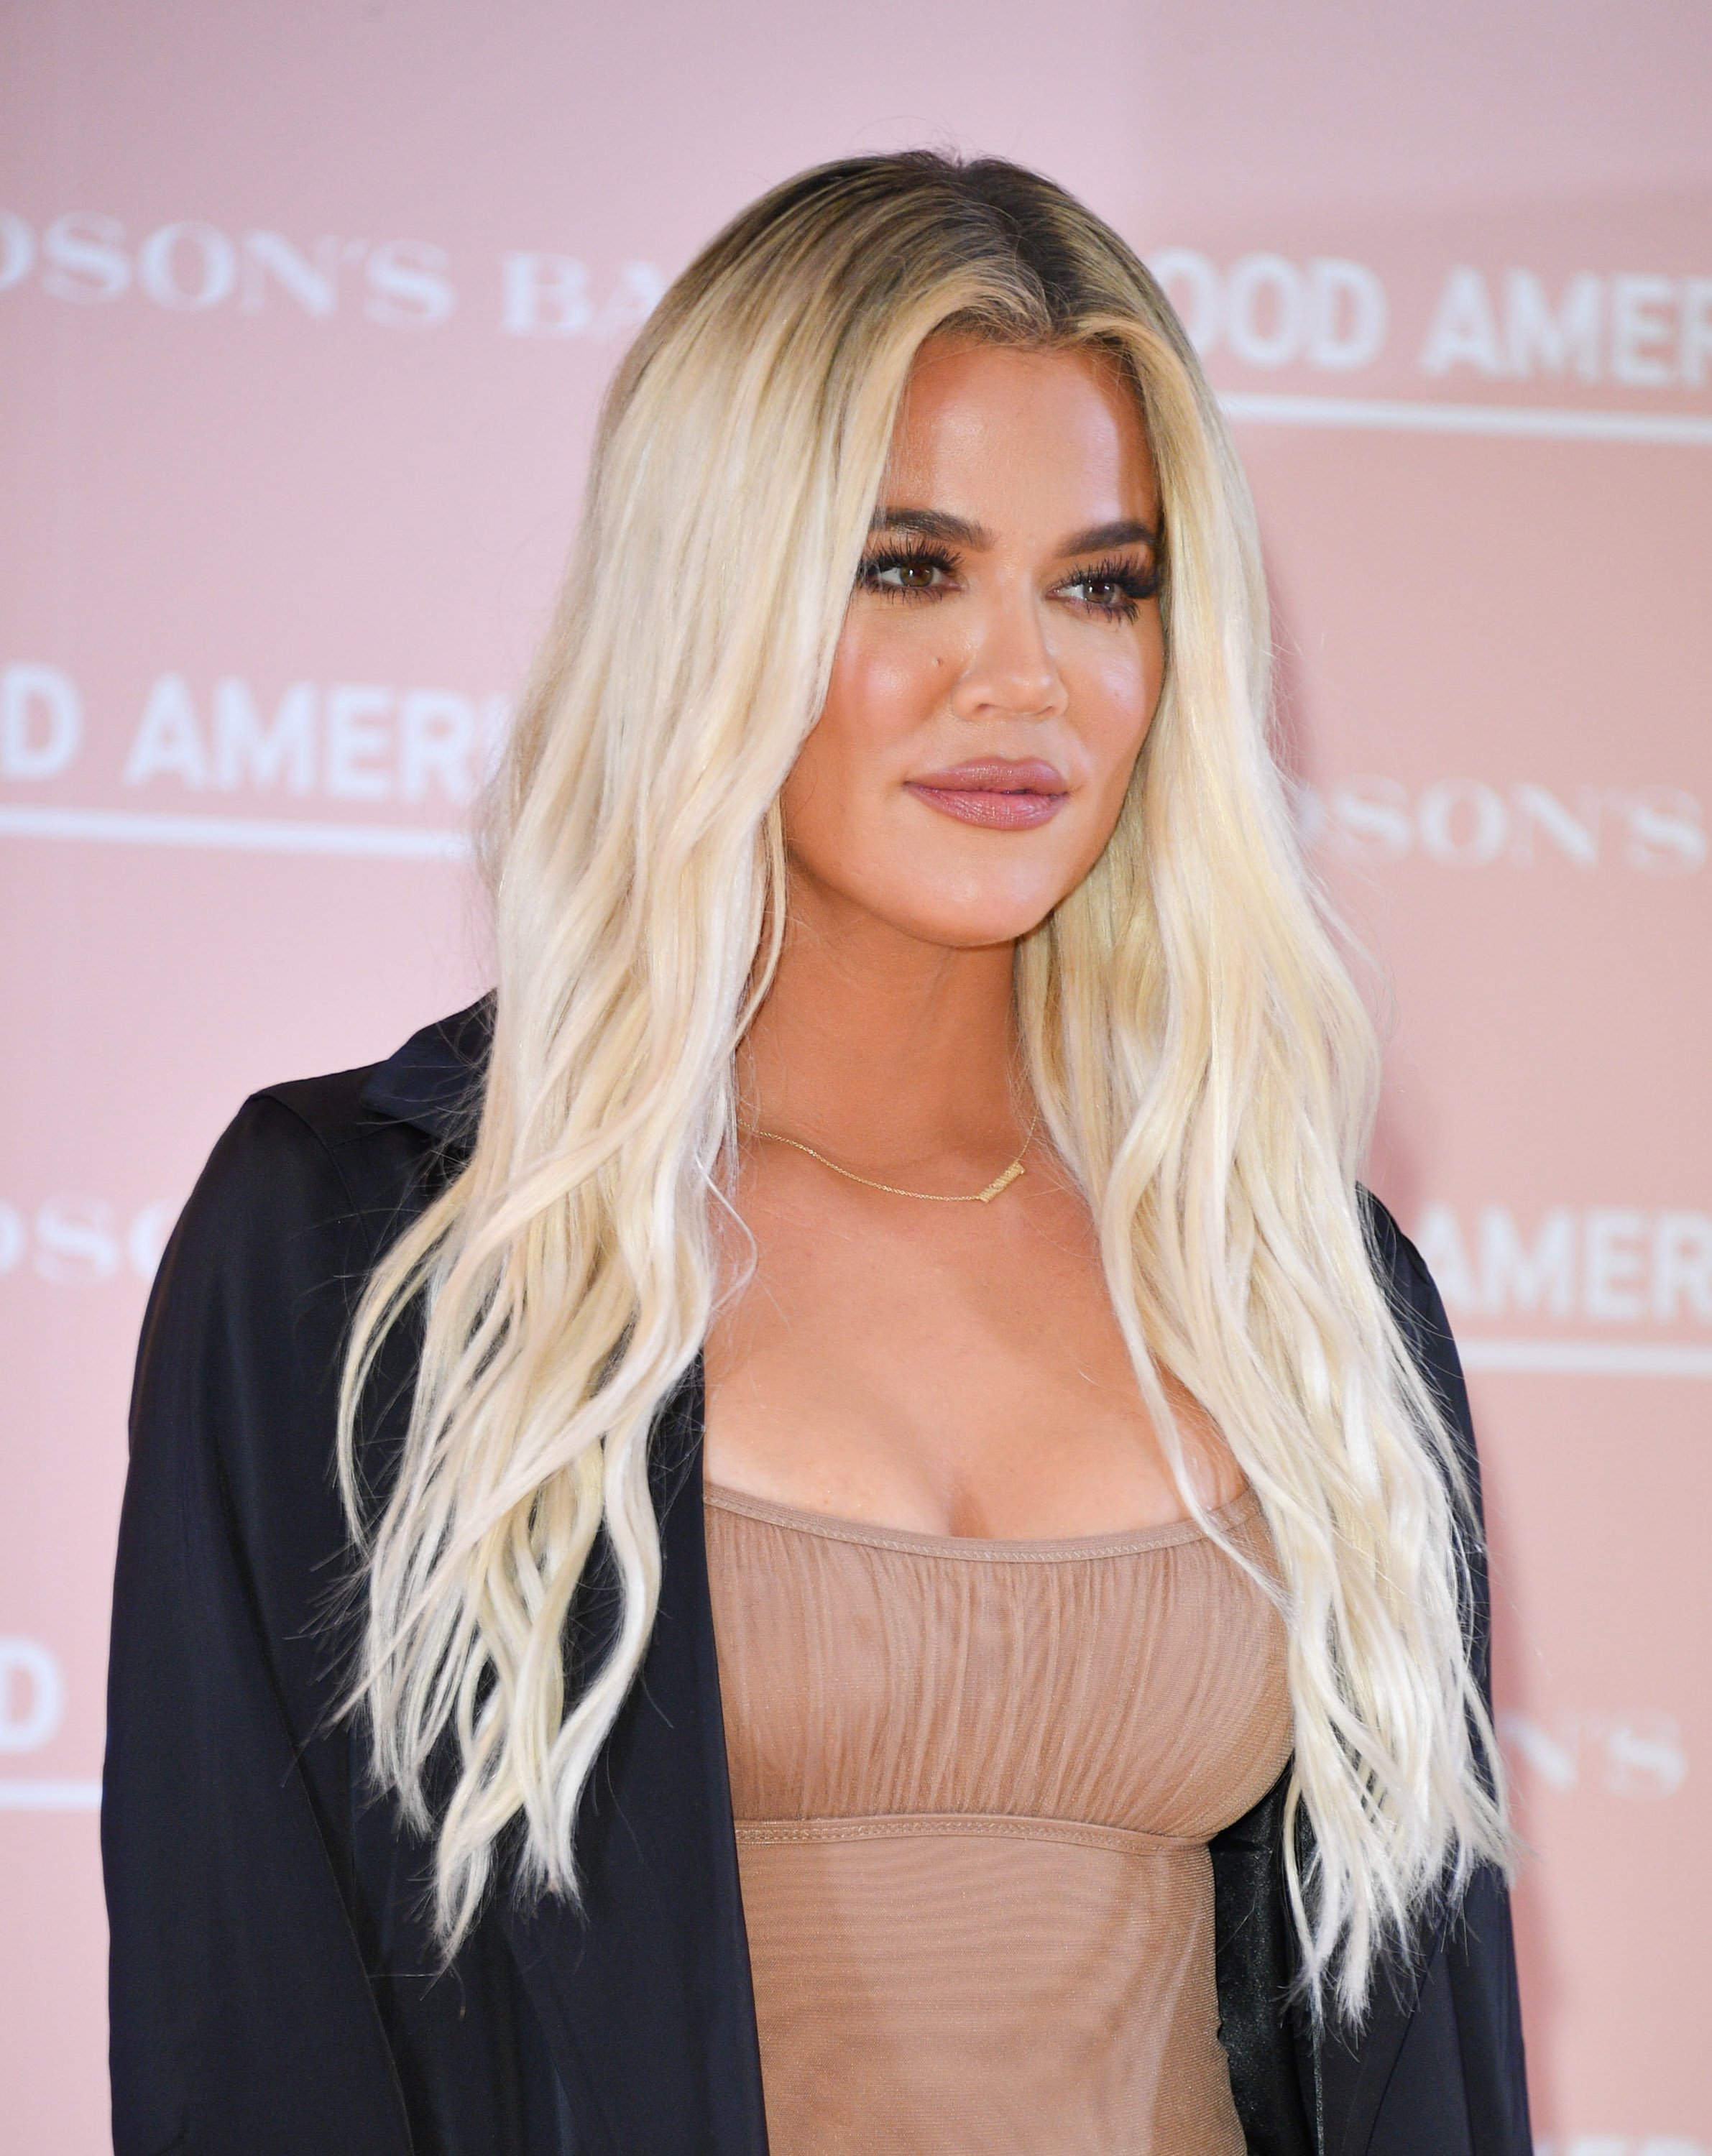 Khloe Kardashian attends the launch of Good American in Toronto on September 18, 2019 | Photo: Getty Images